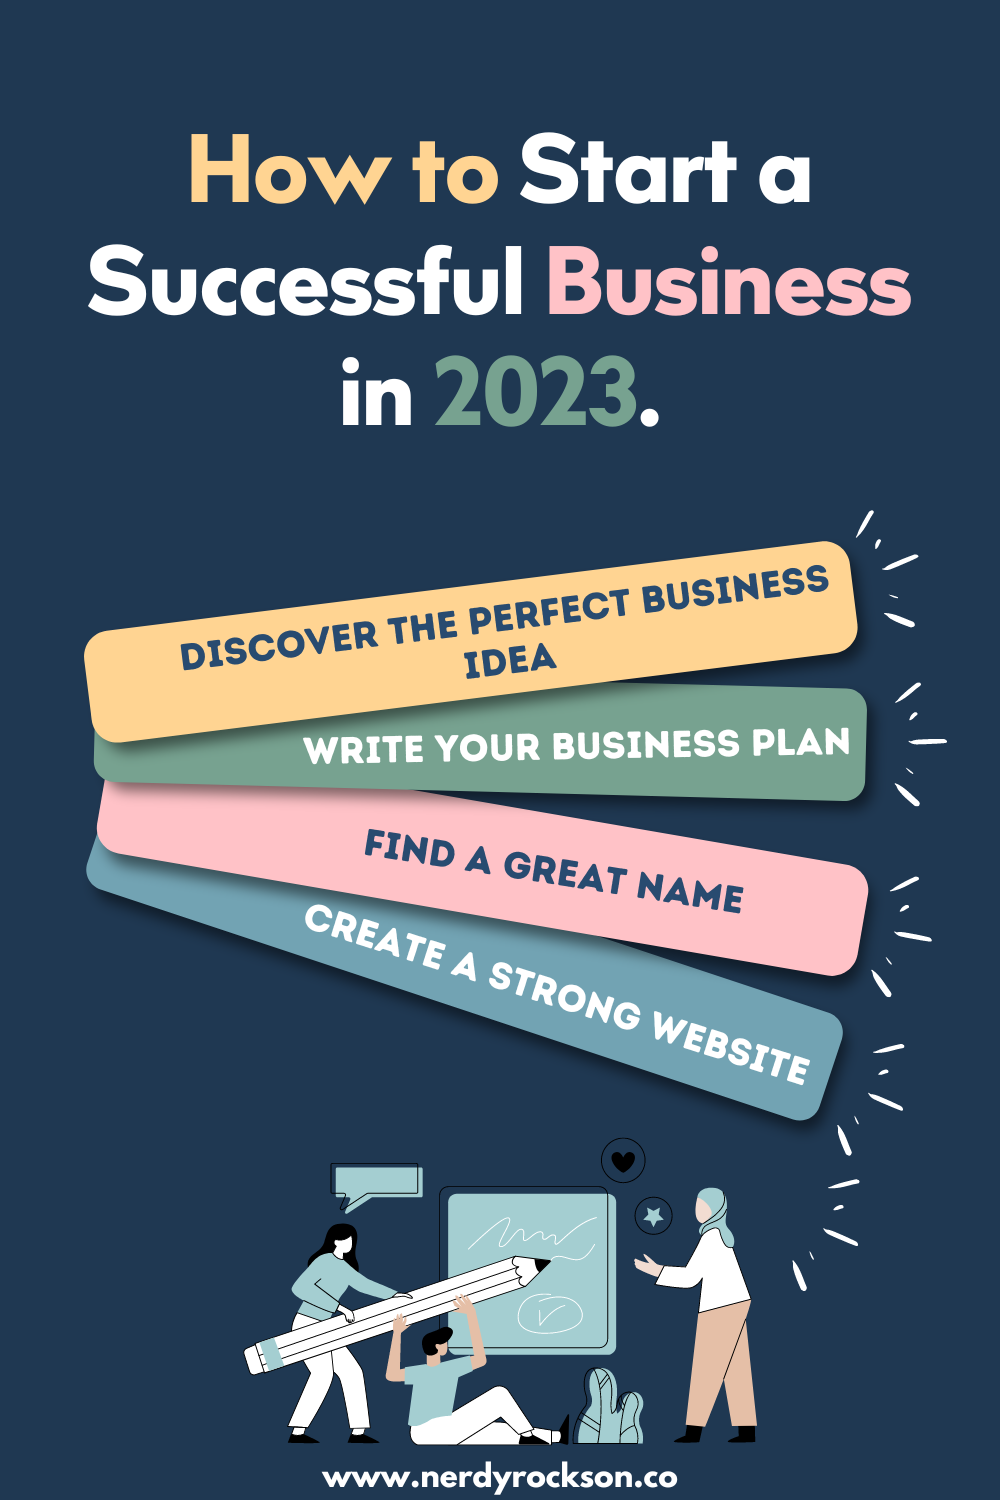 How to Start a Successful Business in 2023